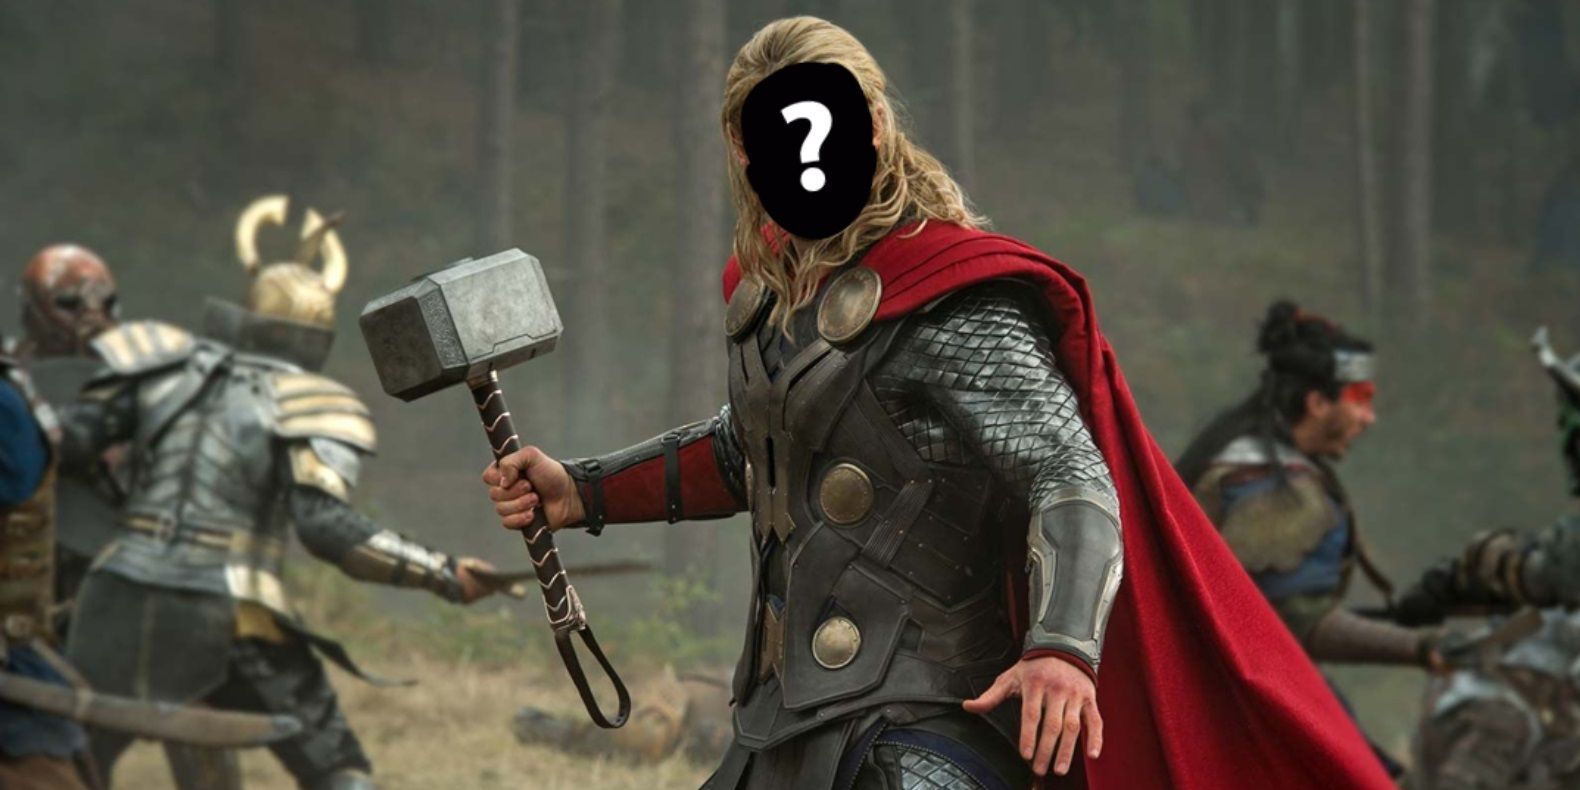 Thor with a question mark over his face